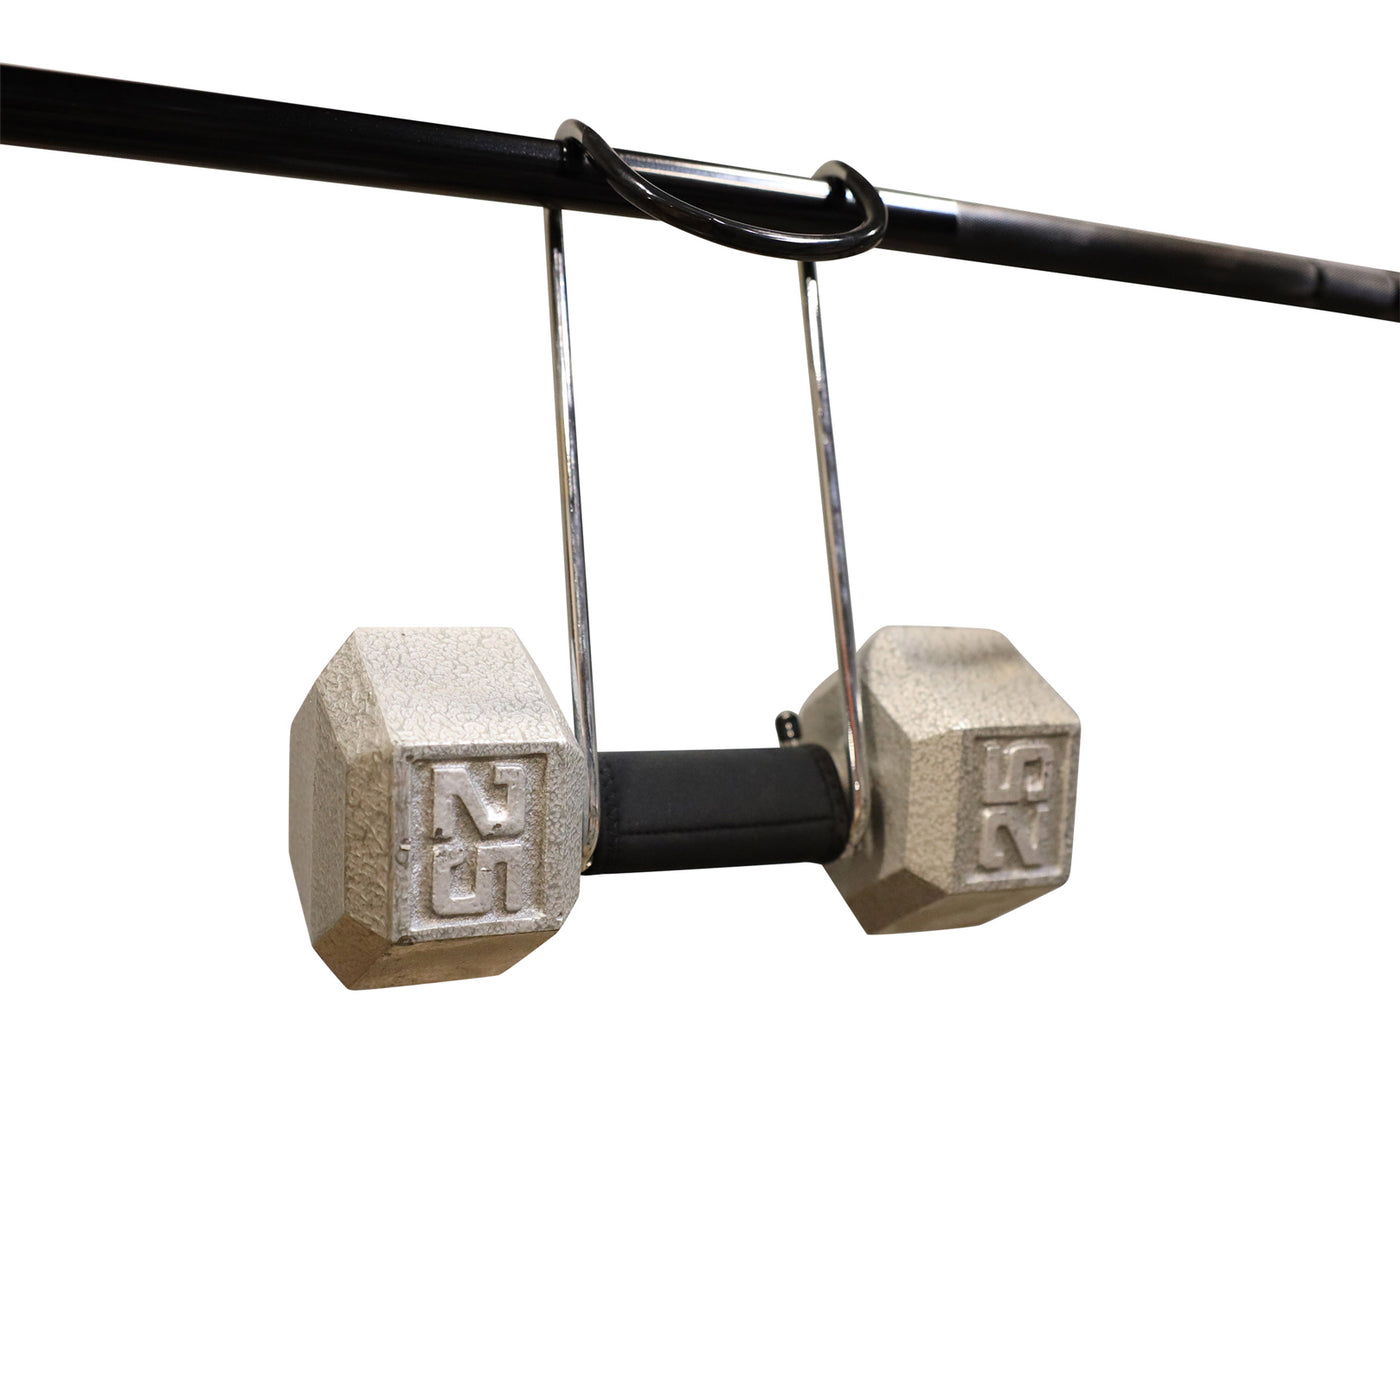 Pair of X-3 or TITAN Series Dumbbell Weight Bar Holders - Rated 225 LB Each  - J-Hook Style Mounting